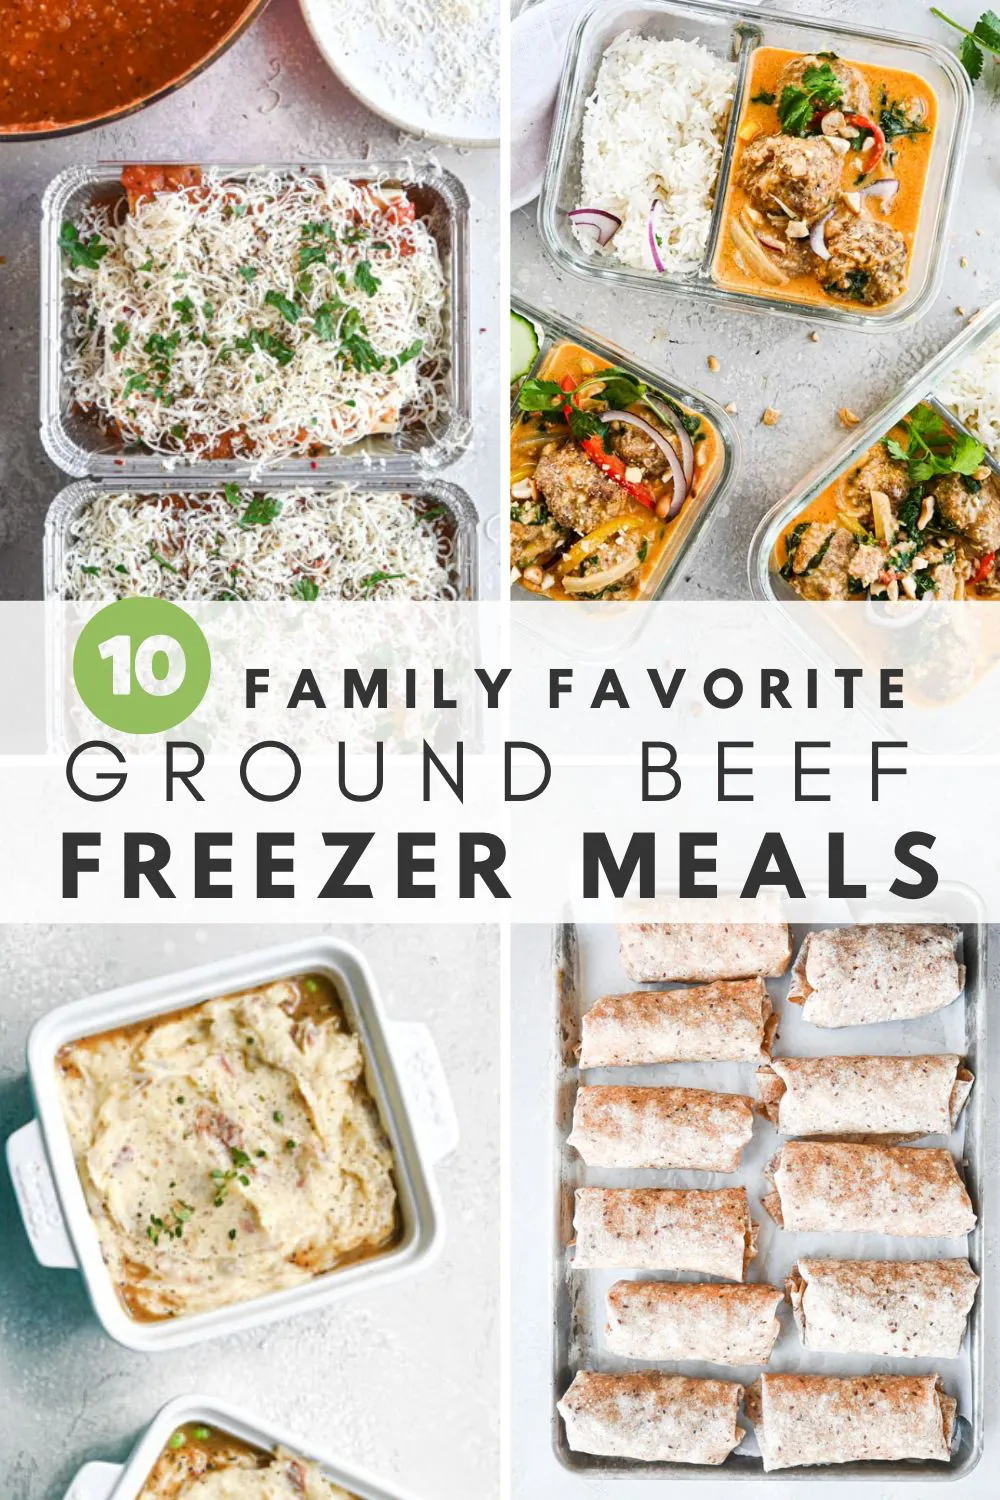 10 Family Favorite Ground Beef Freezer Meals